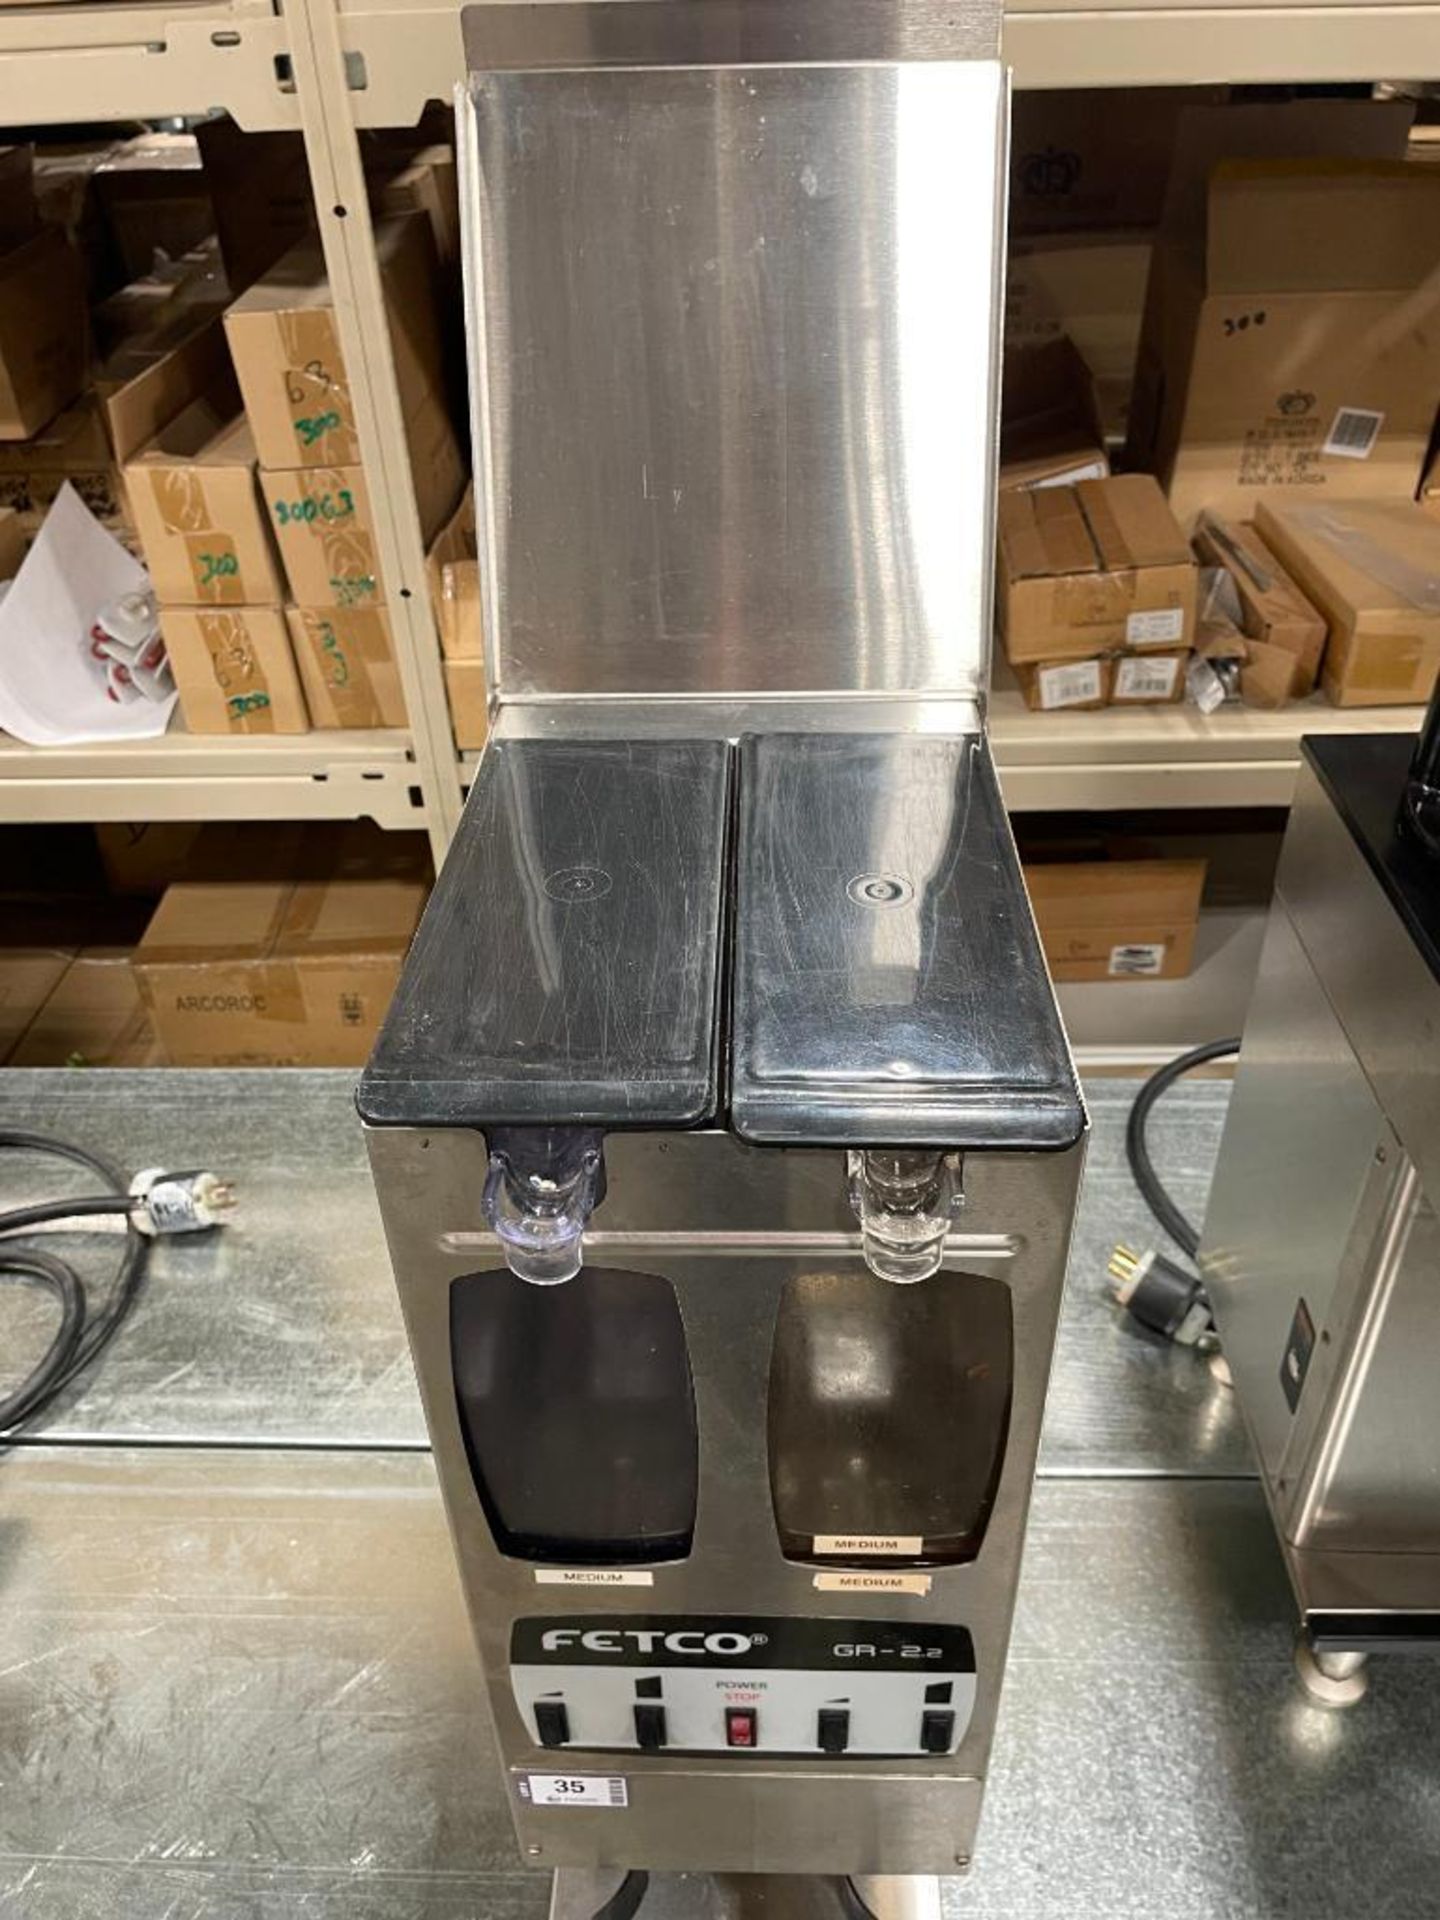 FETCO GR-2.2 DOUBLE HOPPER COFFEE GRINDER - Image 6 of 13